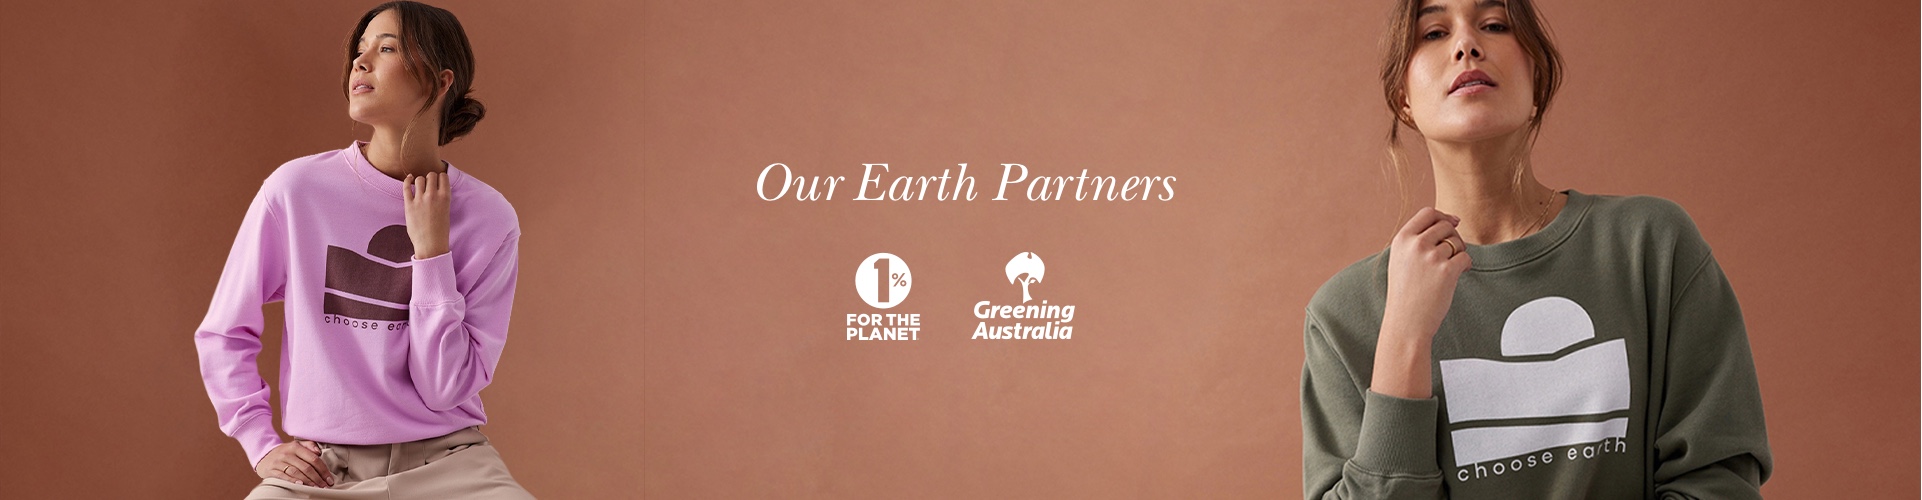 Our Earth Partners